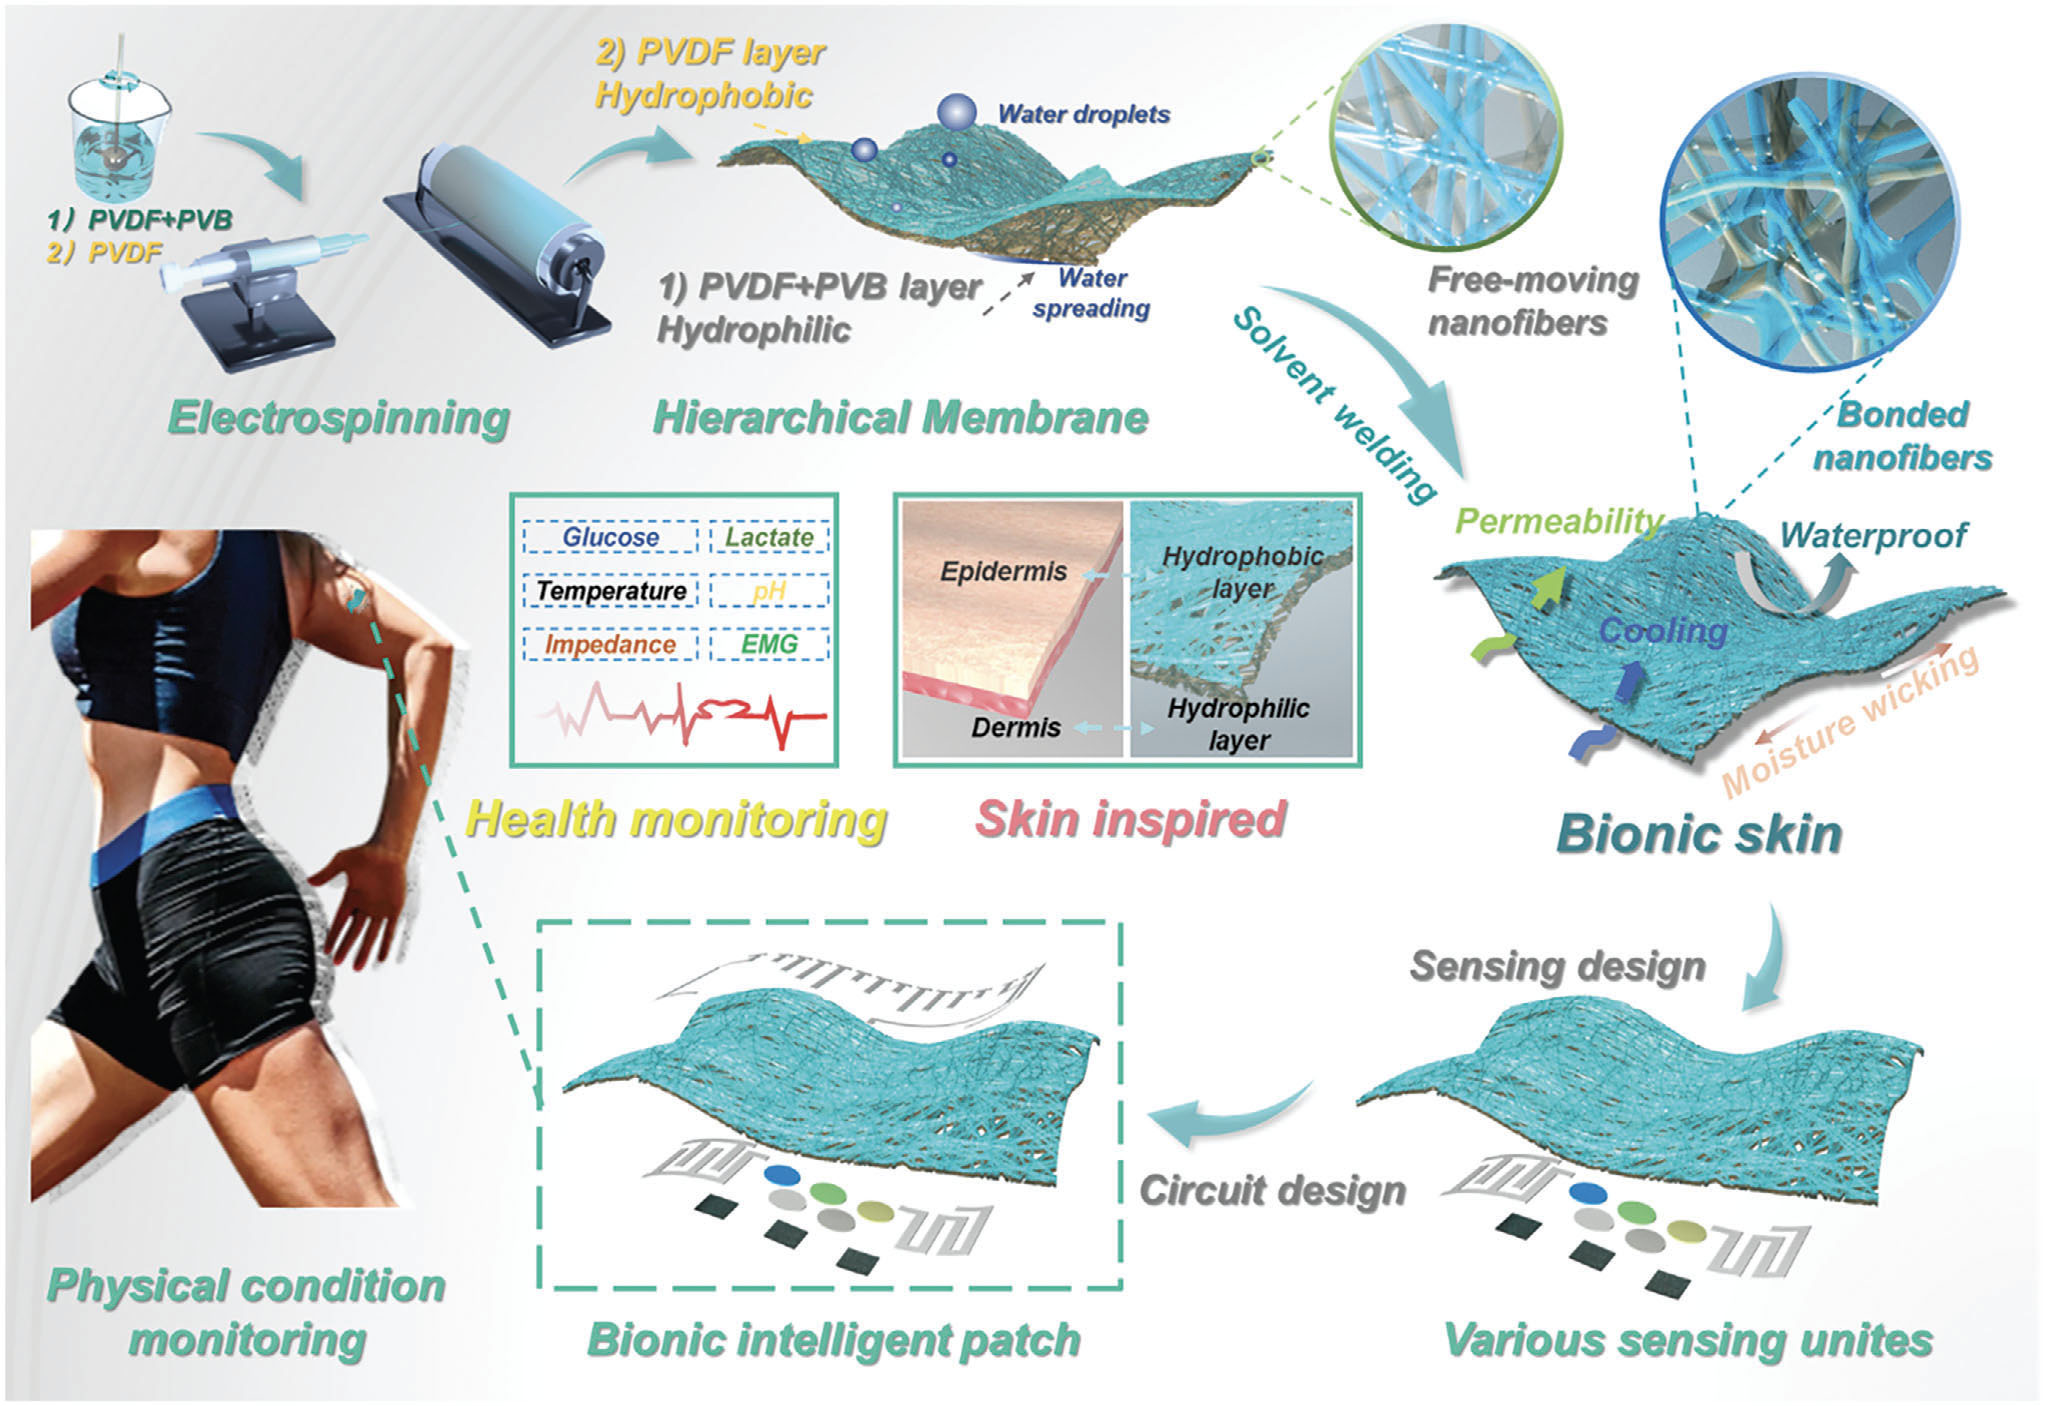 The schematic diagram of bionic intelligent skin with air permeability, moisture permeability, waterproofness, multifunctional sensing property, and big data analysis for different physical conditions